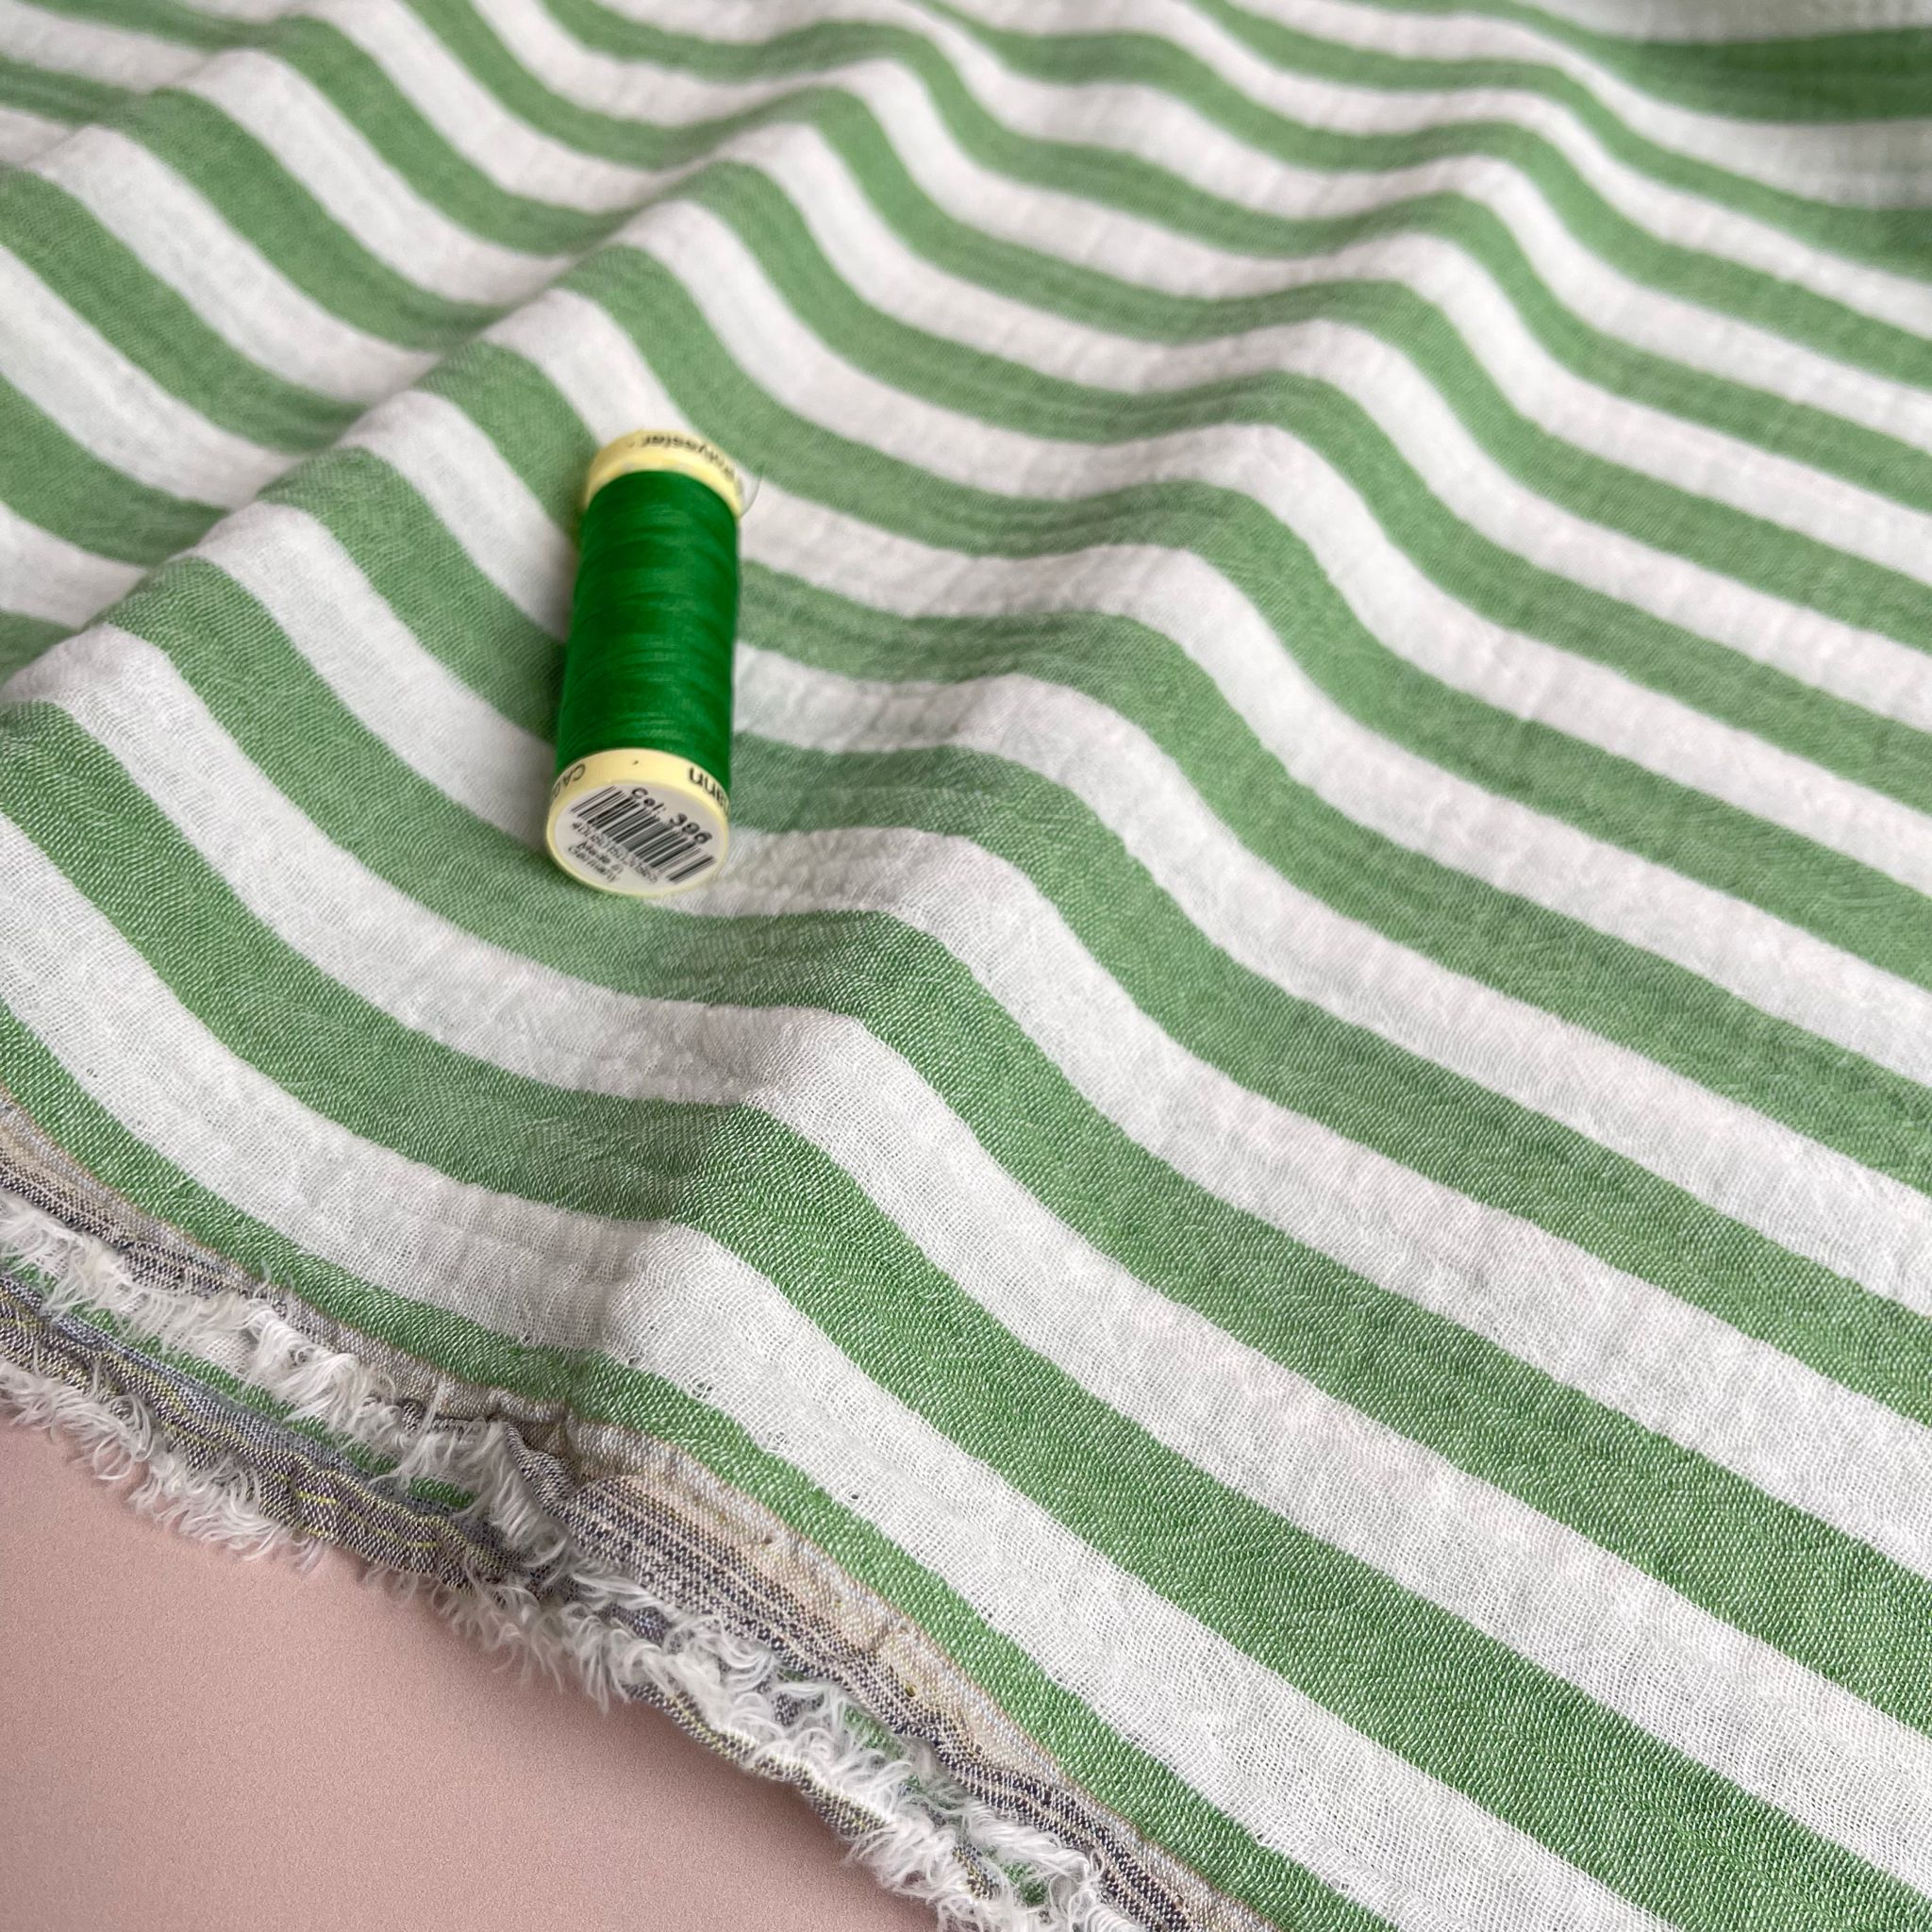 REMNANT 0.77 Metre - Yarn Dyed Stripe Cotton Double Gauze in Grass Green